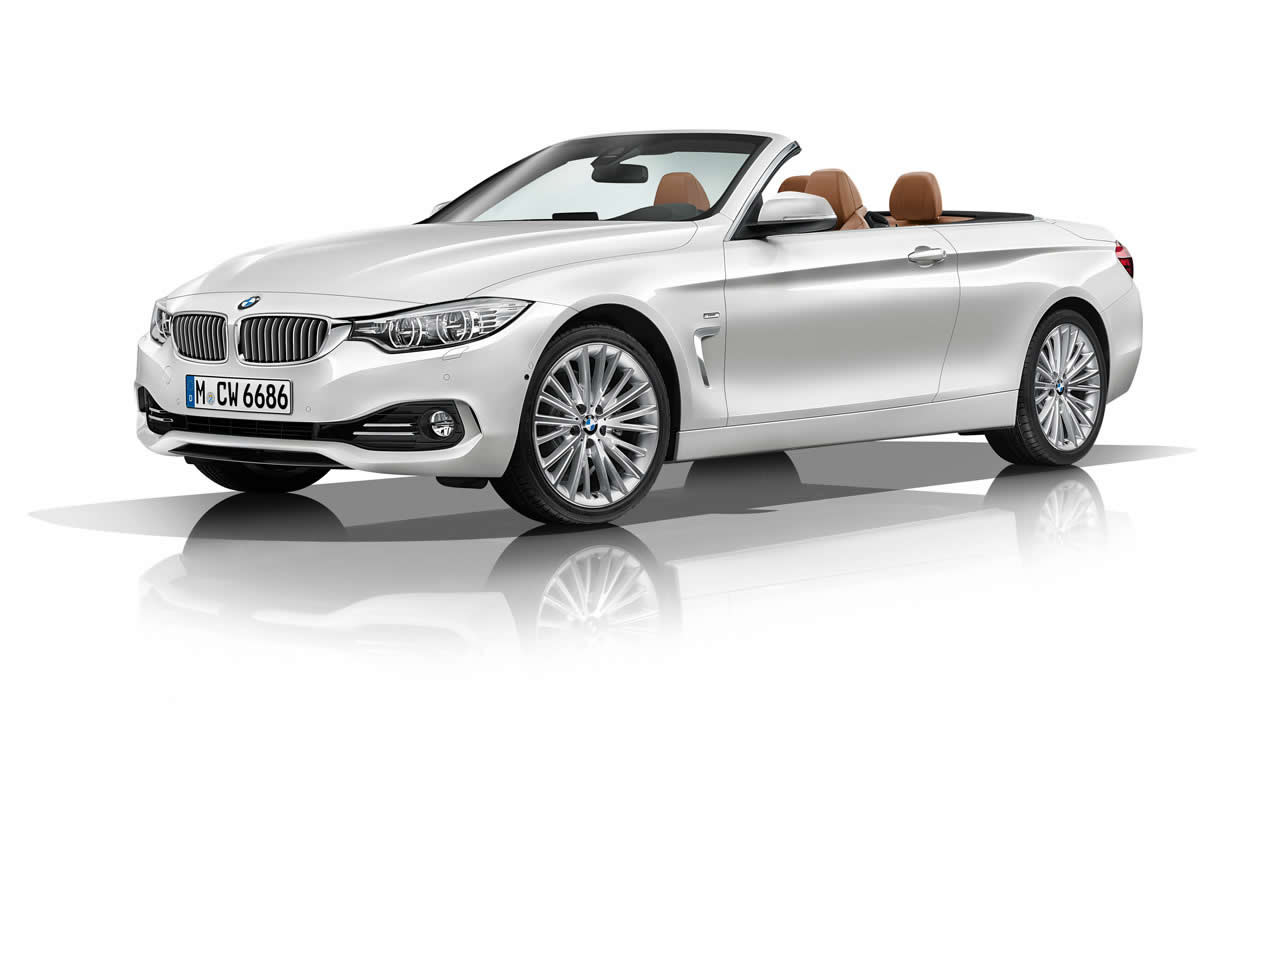 BMW 4-Series Convertible Buying Guide